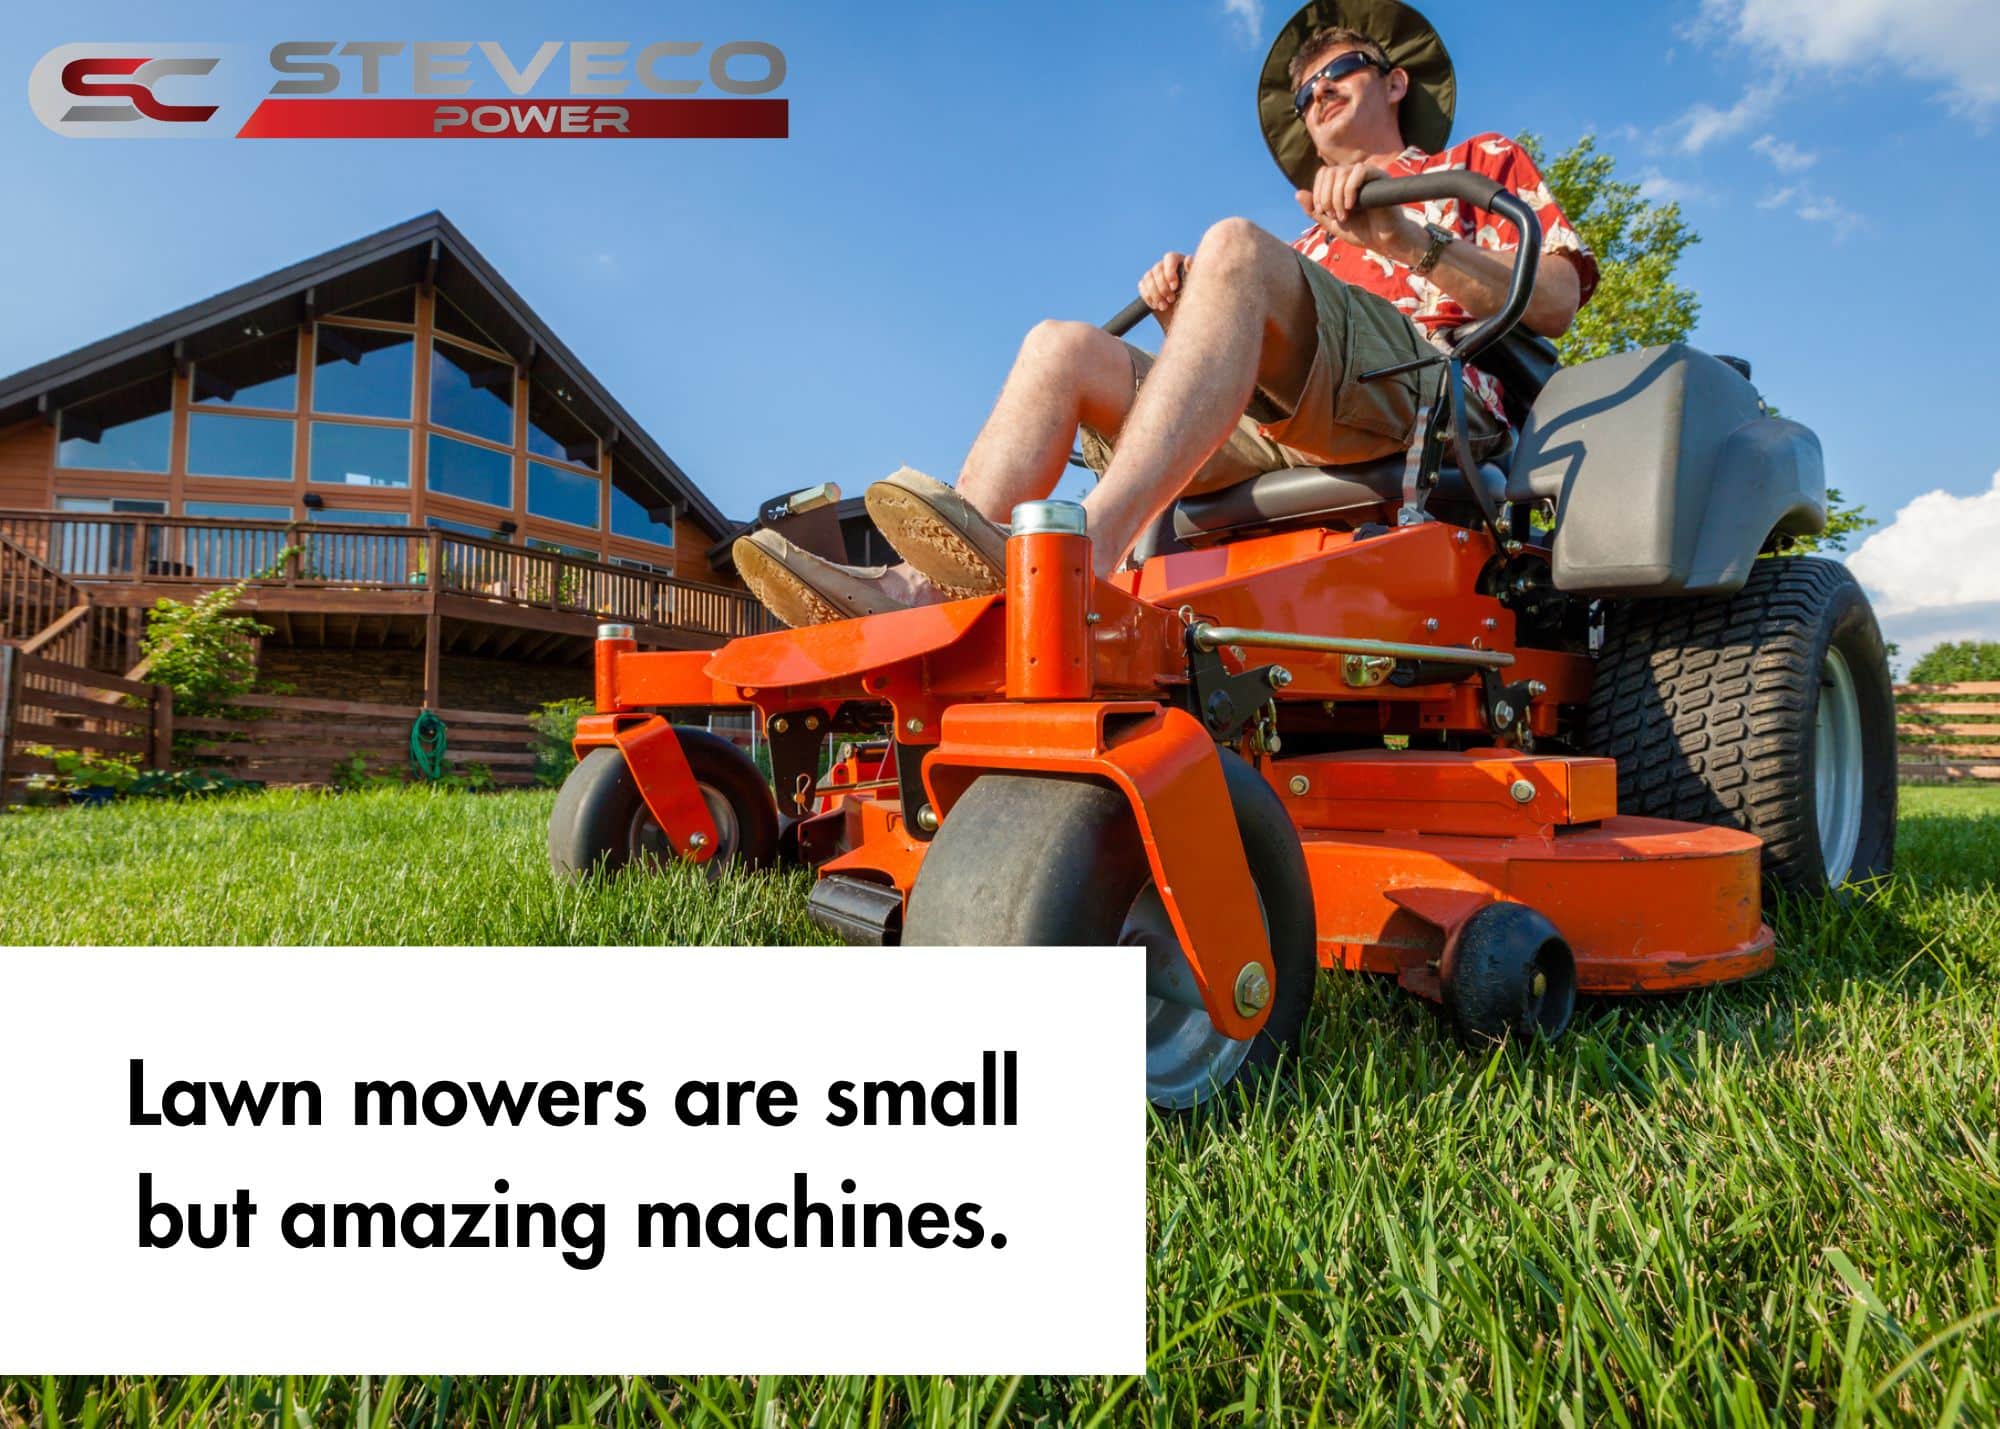 lawn mowers are small but powerful